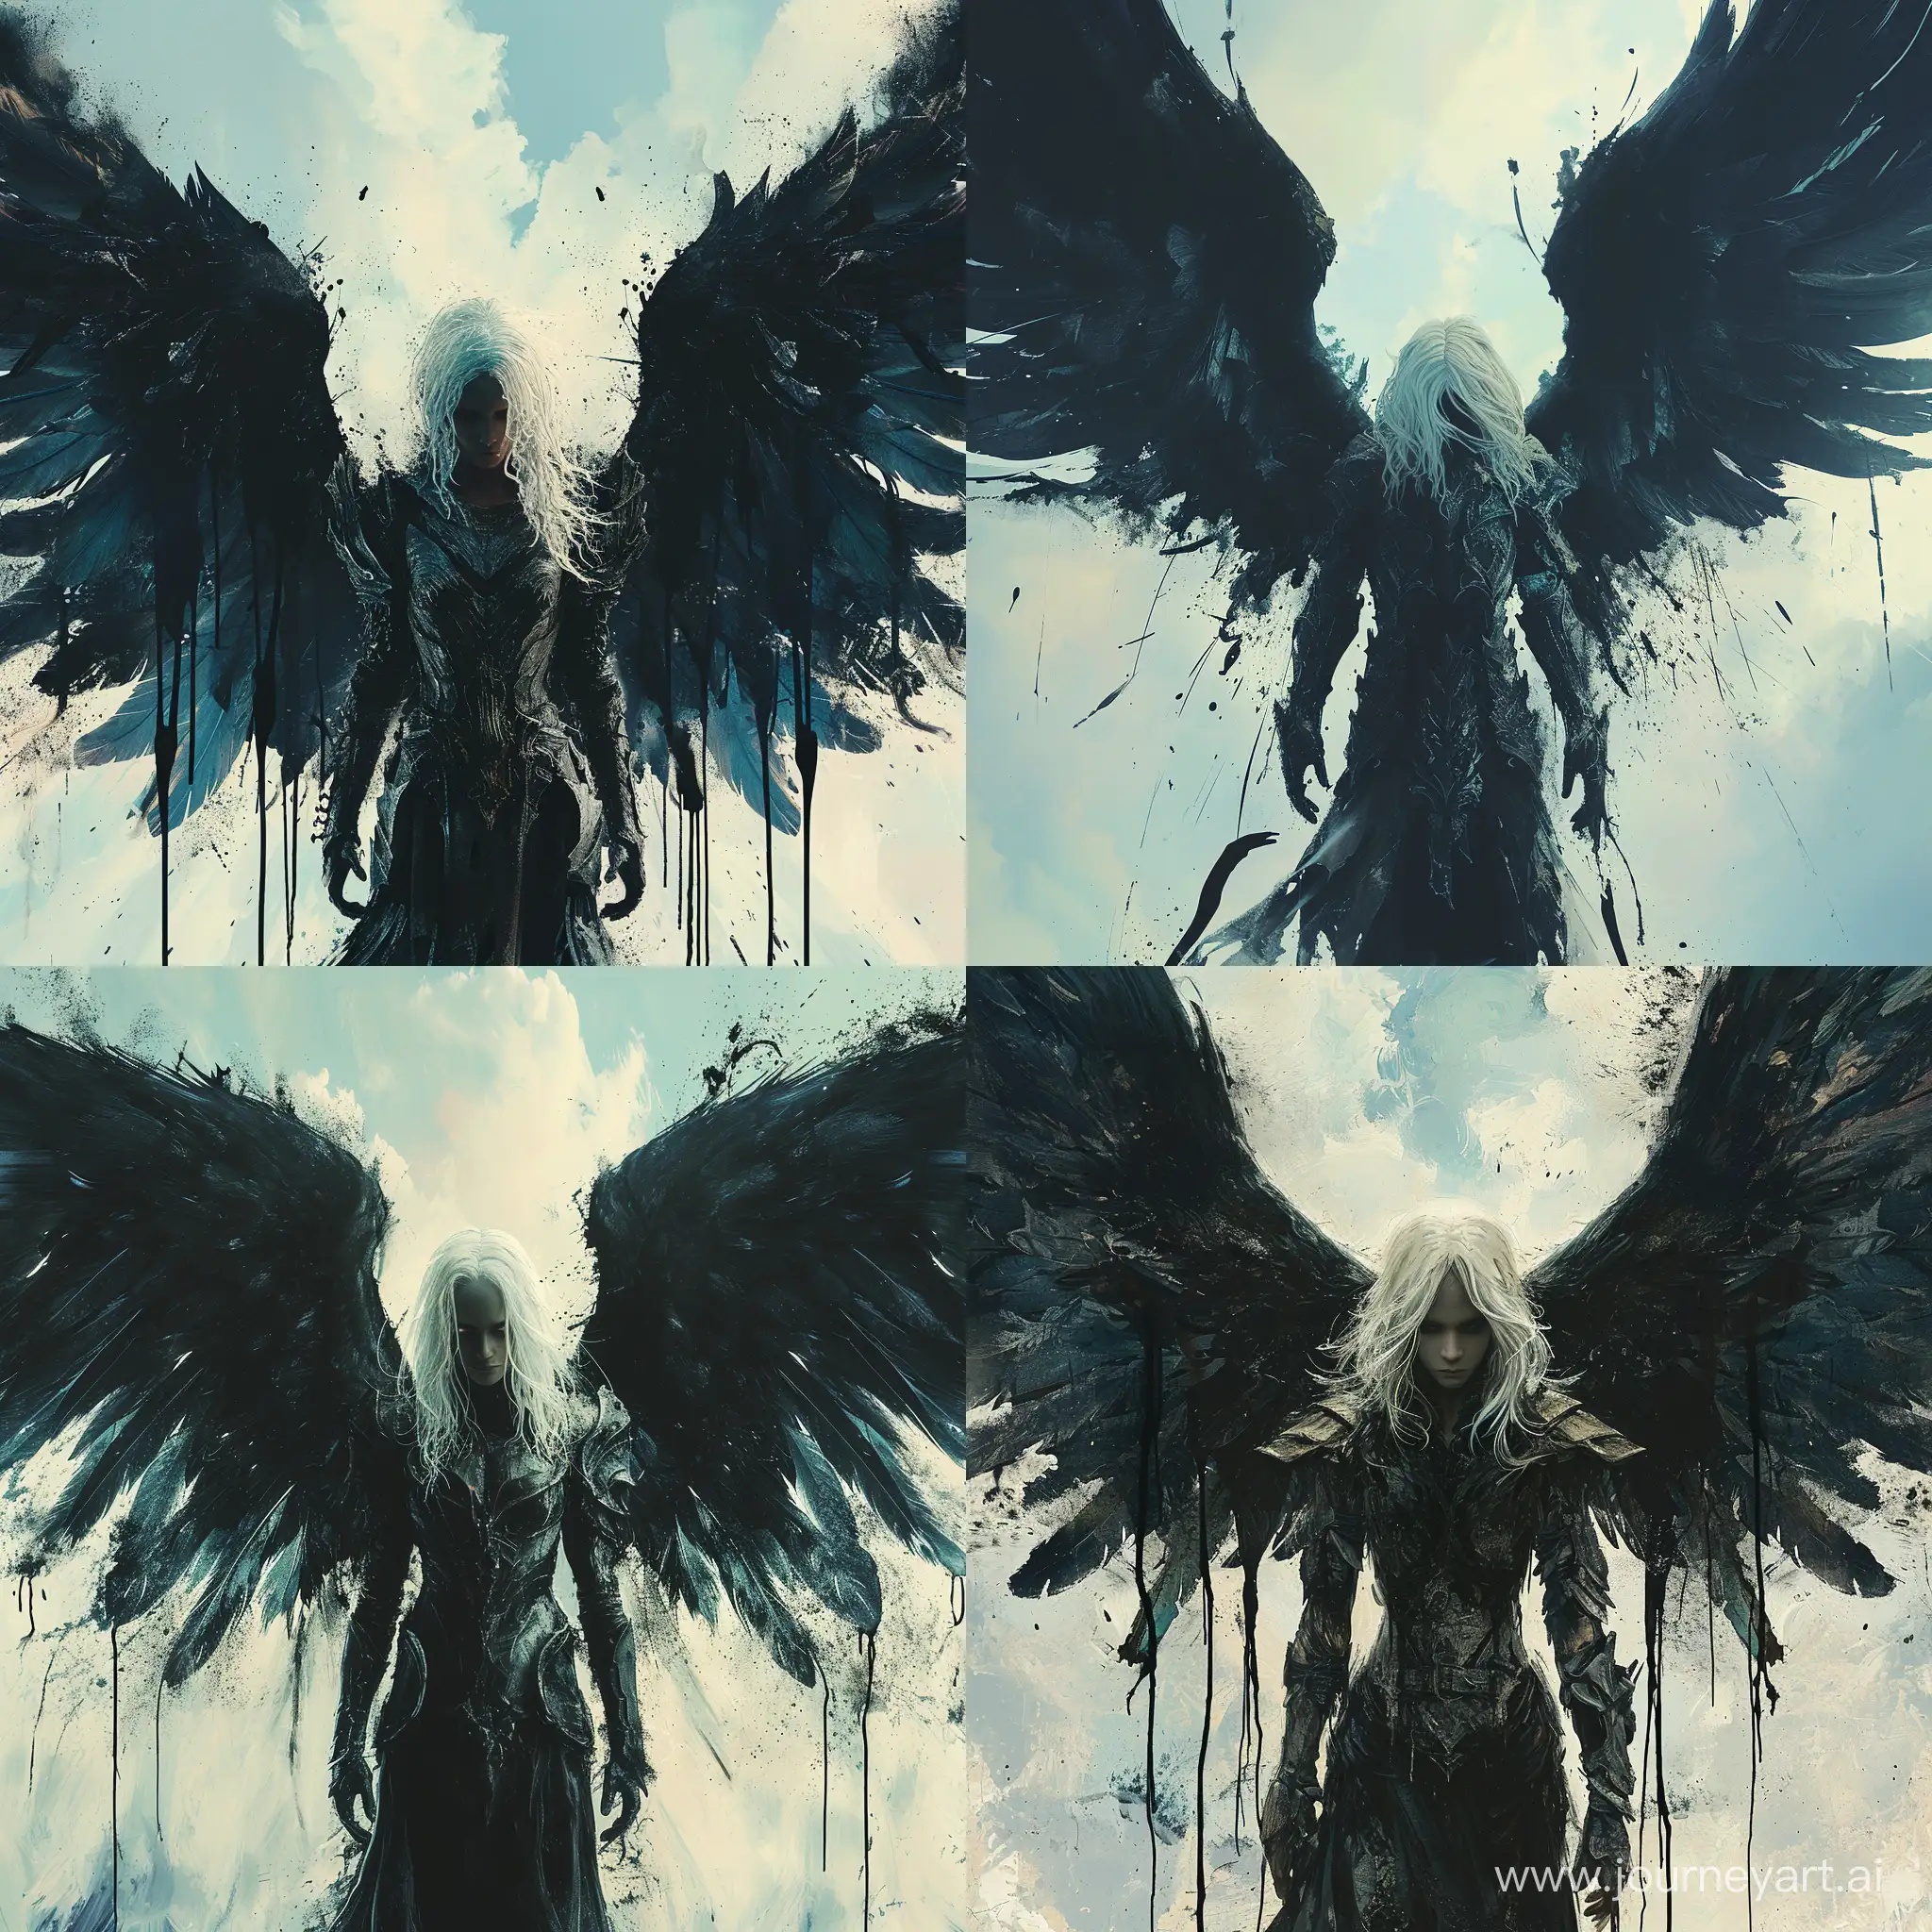 Intentional camera movement, dark angel with large black wings, standing in front of a sky background with white and blue hues, the angel has white hair and is wearing a armor-like outfit, the wings are spread out and there are black paint drips trailing from them, --s 250 --quality 2